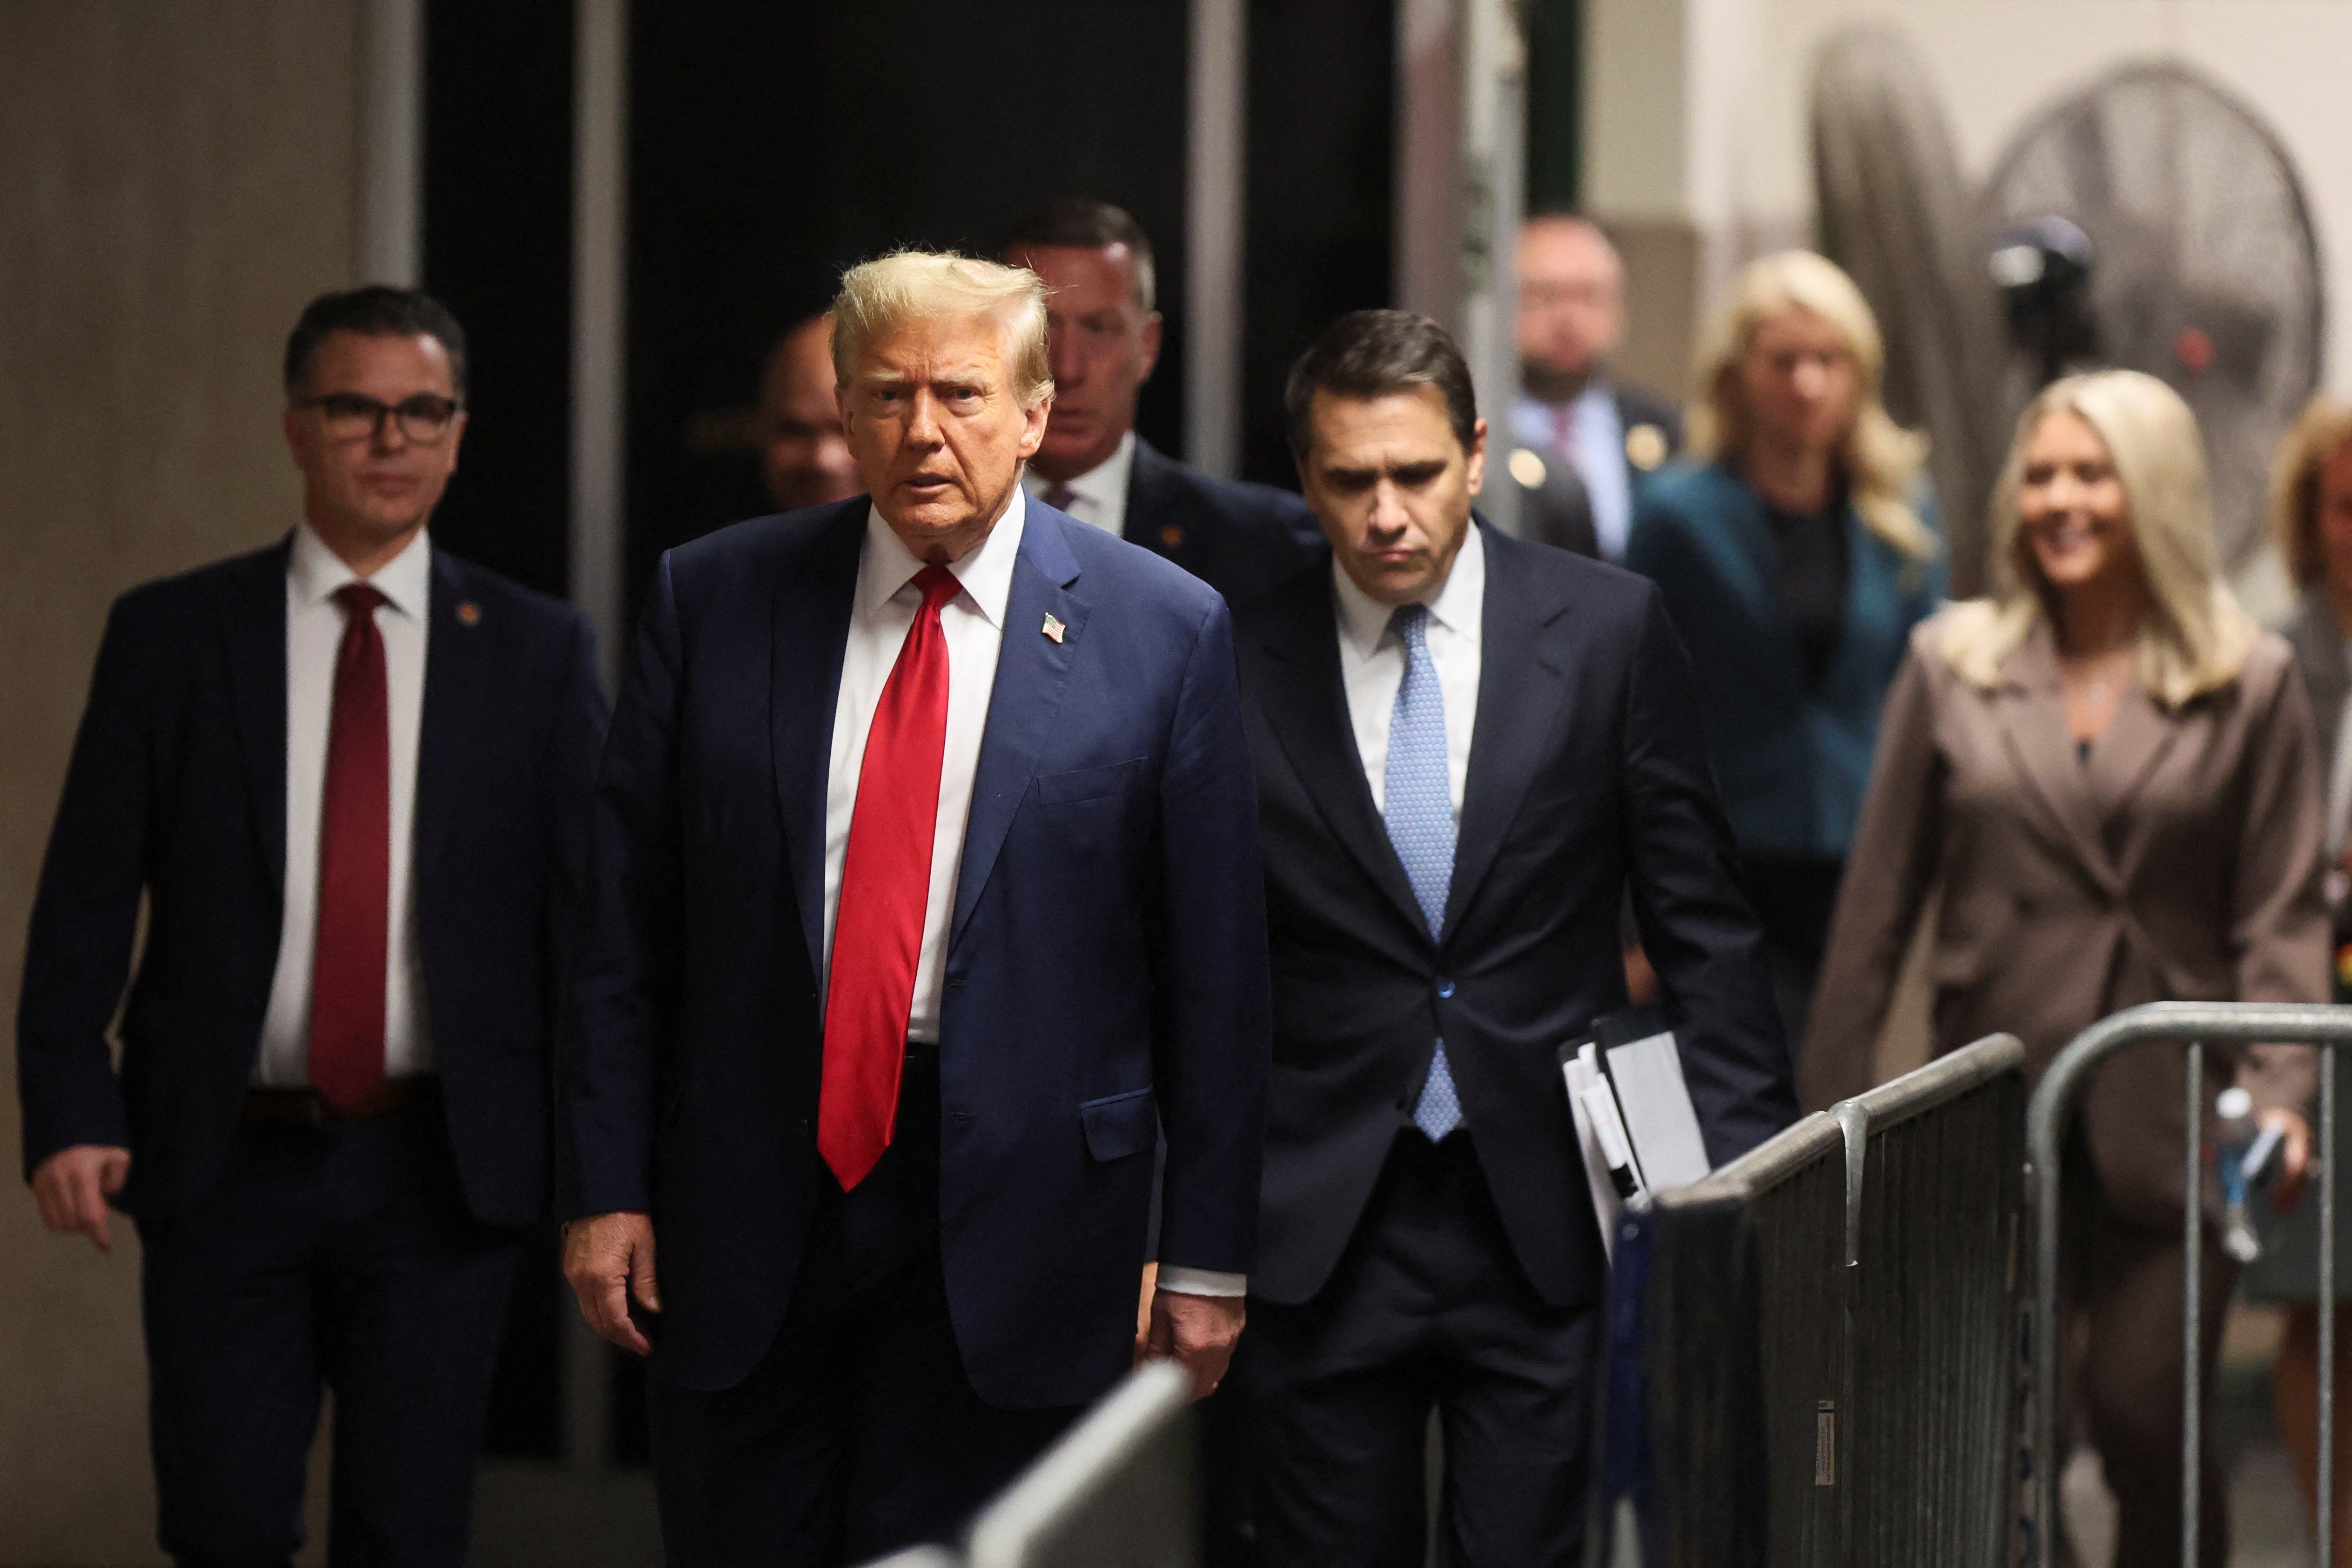 Donald Trump with his attorney Todd Blance (right) in a hallway outside a criminal courtroom in Manhattan on 23 April